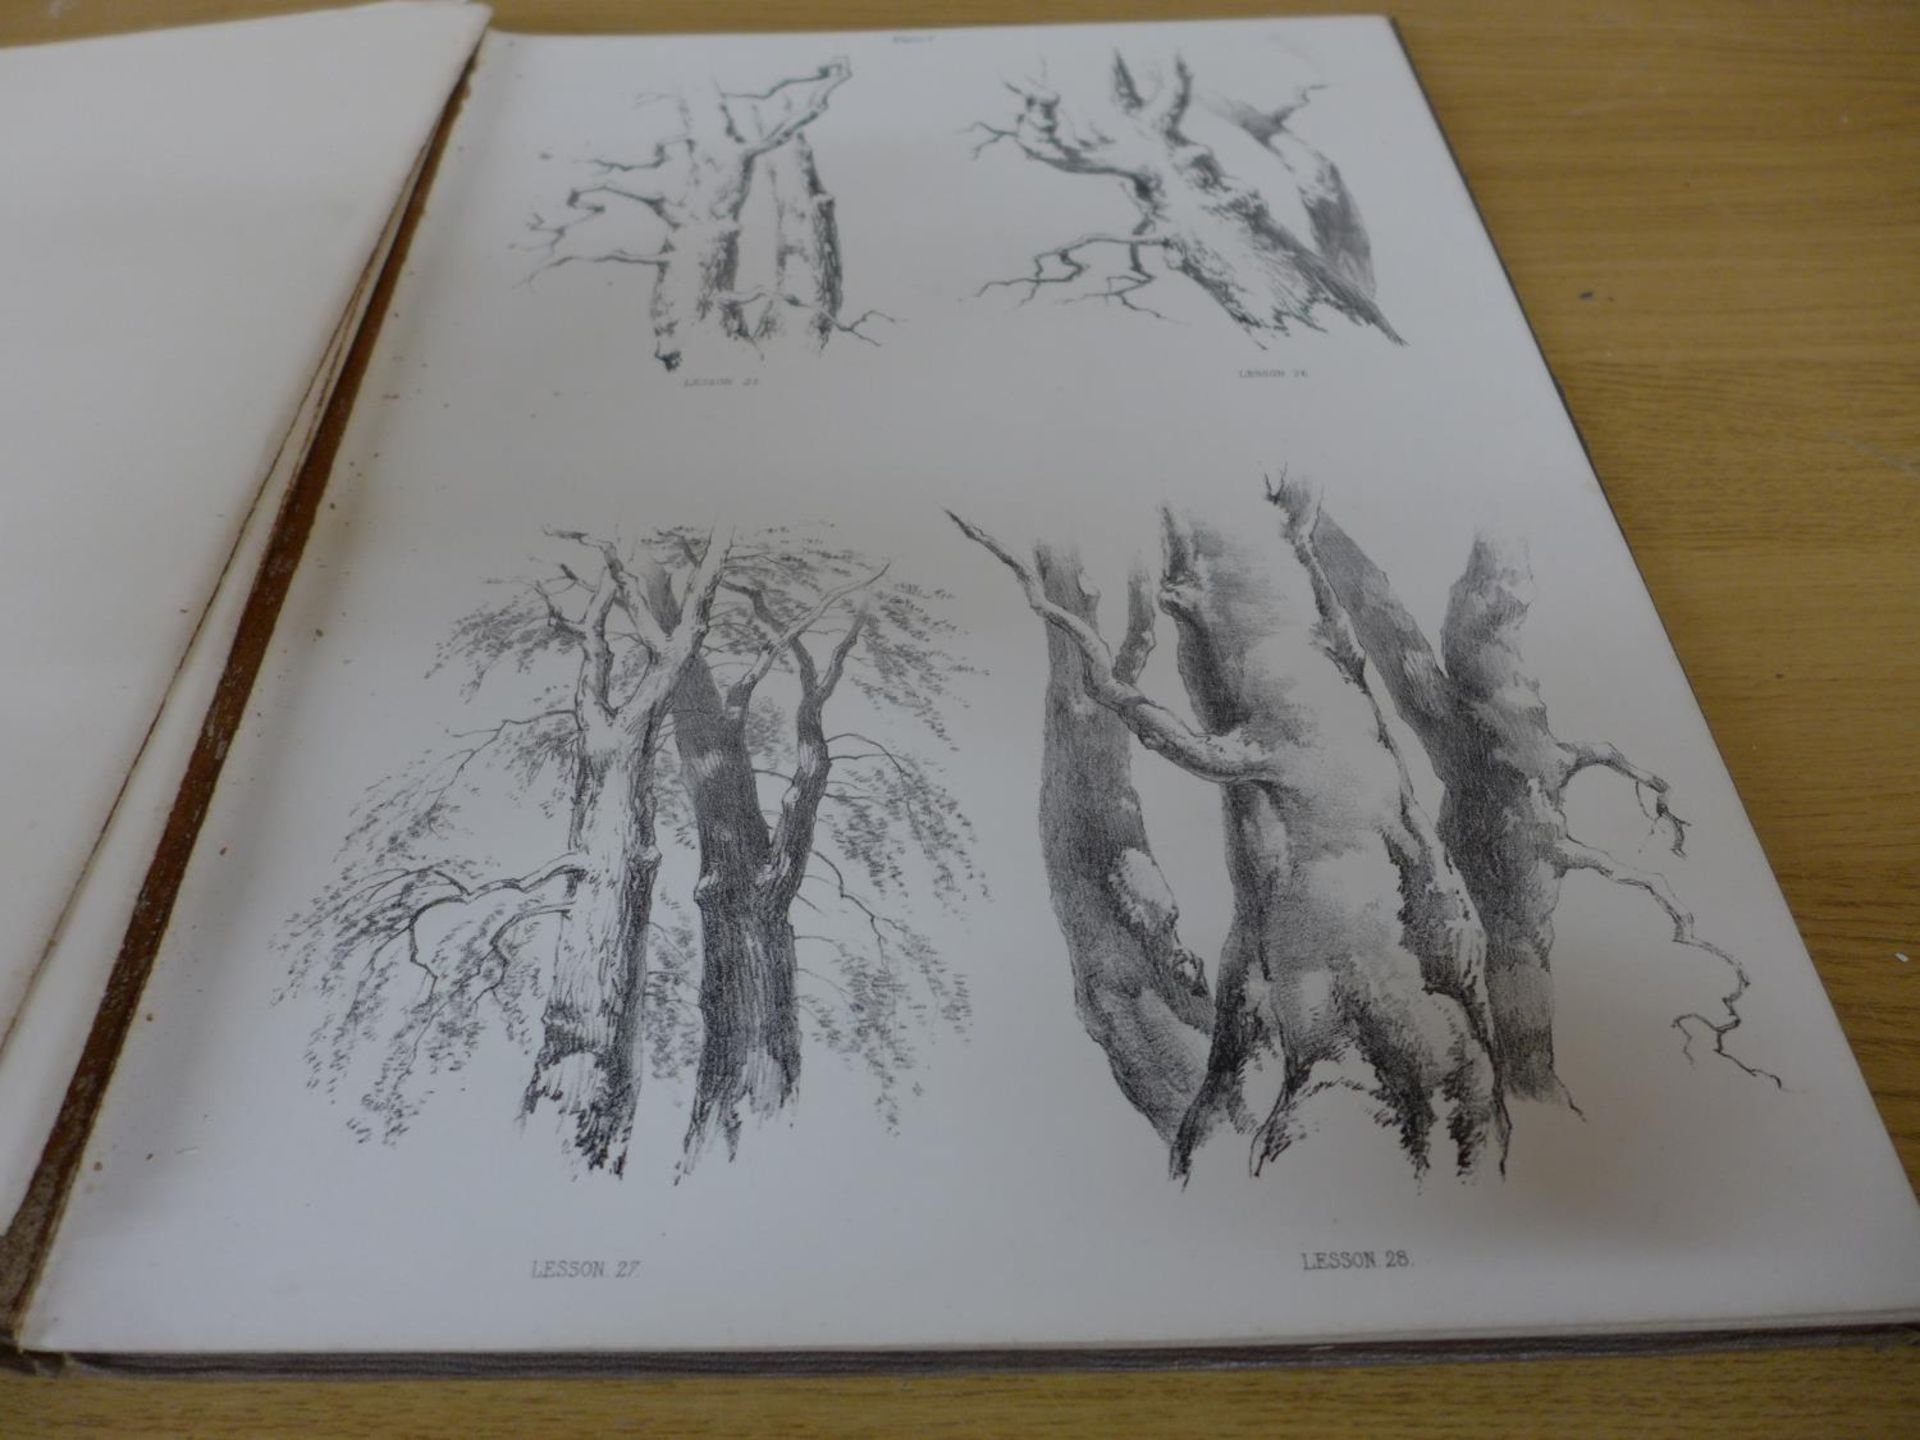 J.D. HARDING 'LESSONS ON TREES' PUBLISHED BY W. KENT & CO, LONDON CIRCA 1879 - Image 5 of 5